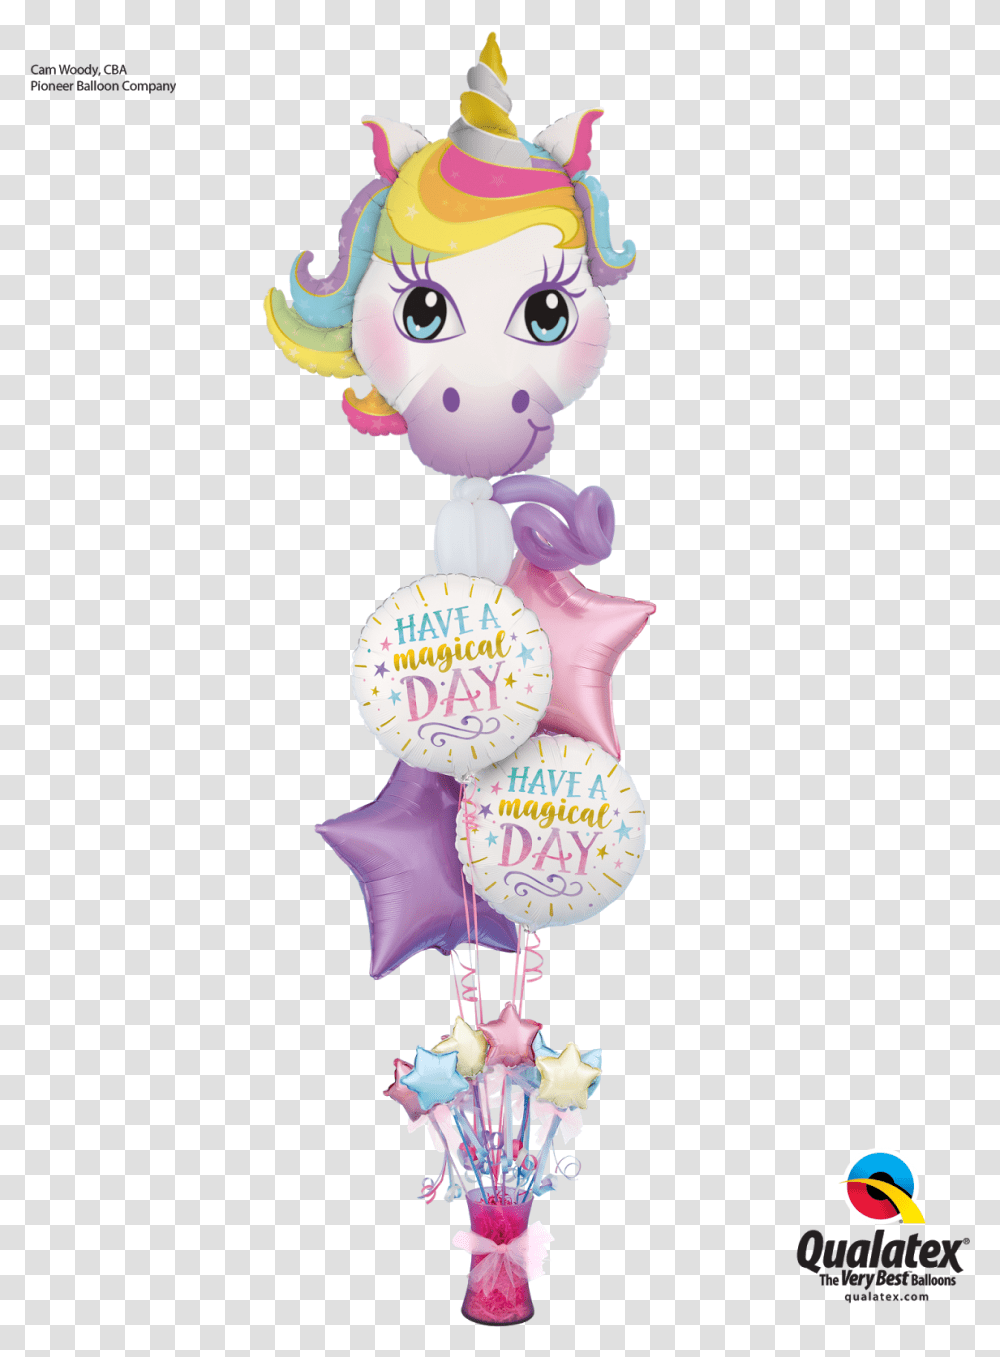 Display By Cam Woody Bouquets Balloons Unicorn Qualatex, Rattle Transparent Png